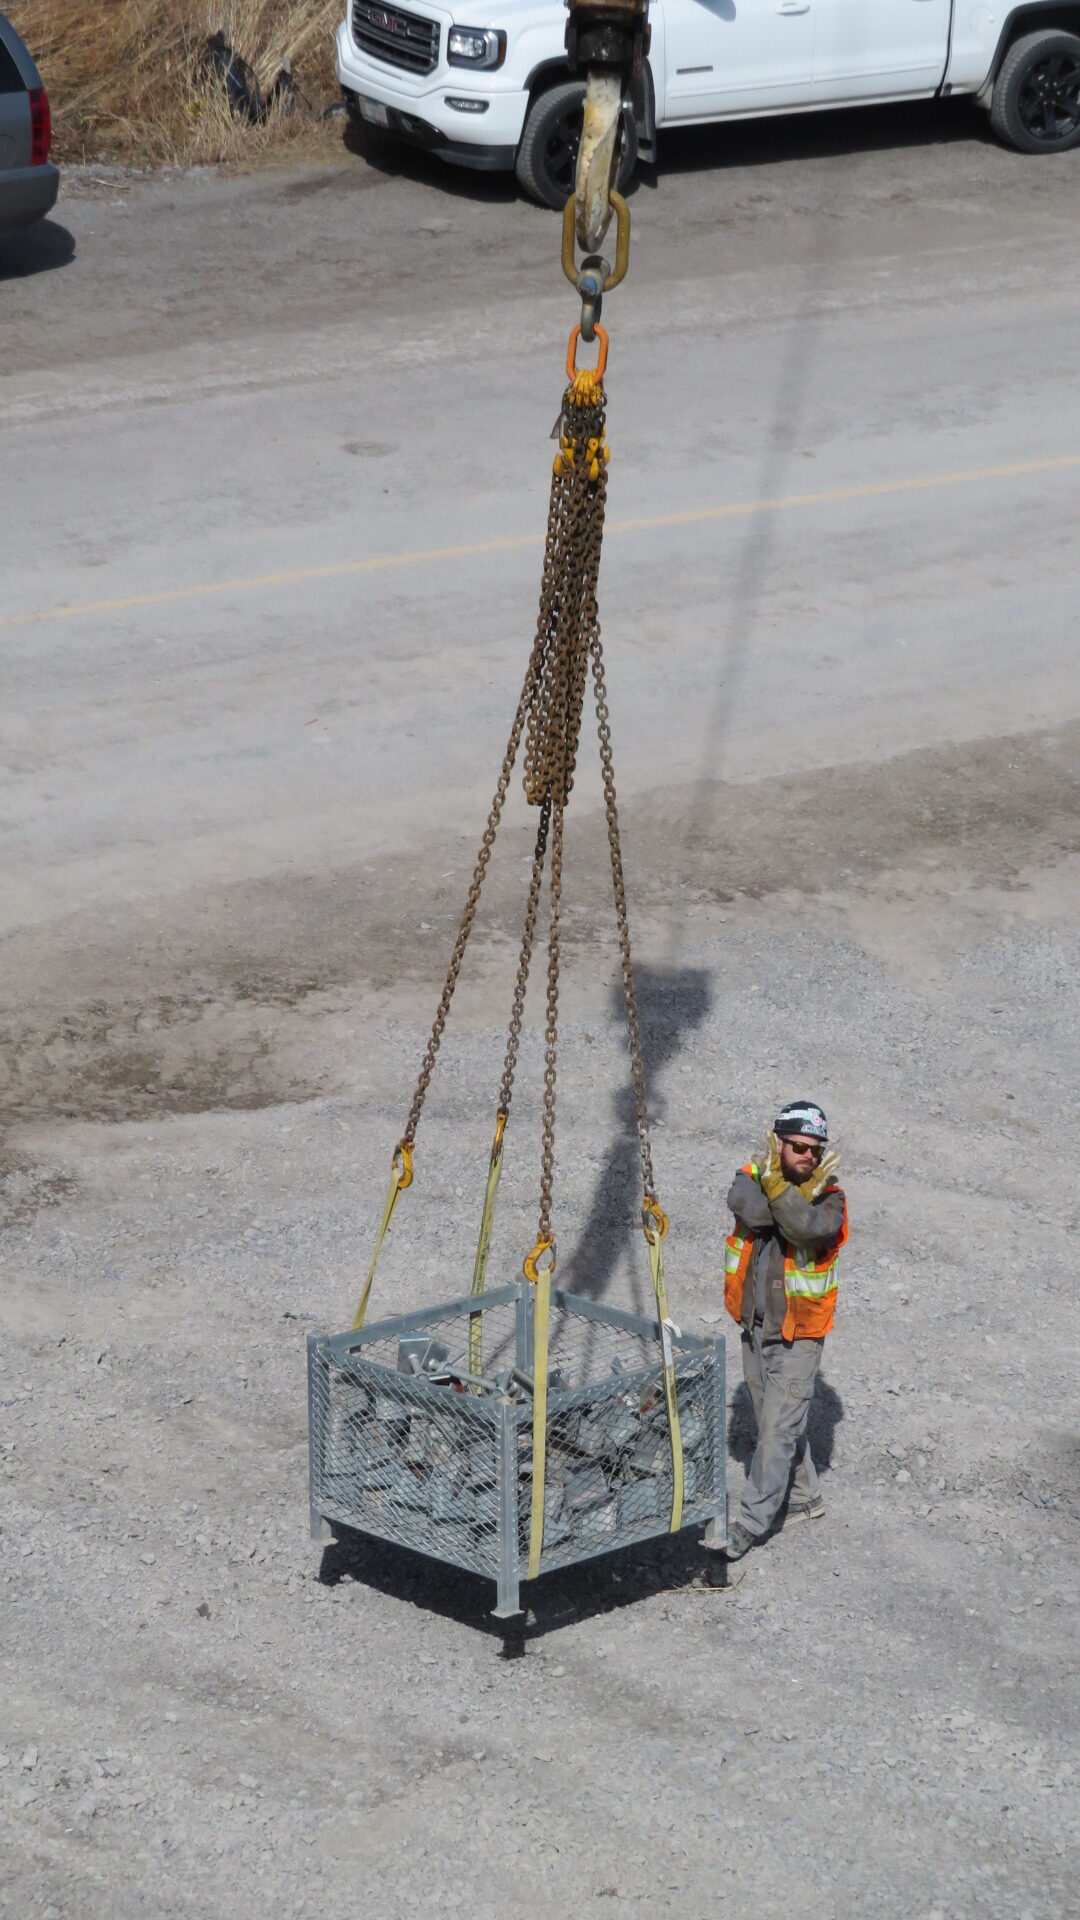 Hooking up the 160-ton crane to be lifted